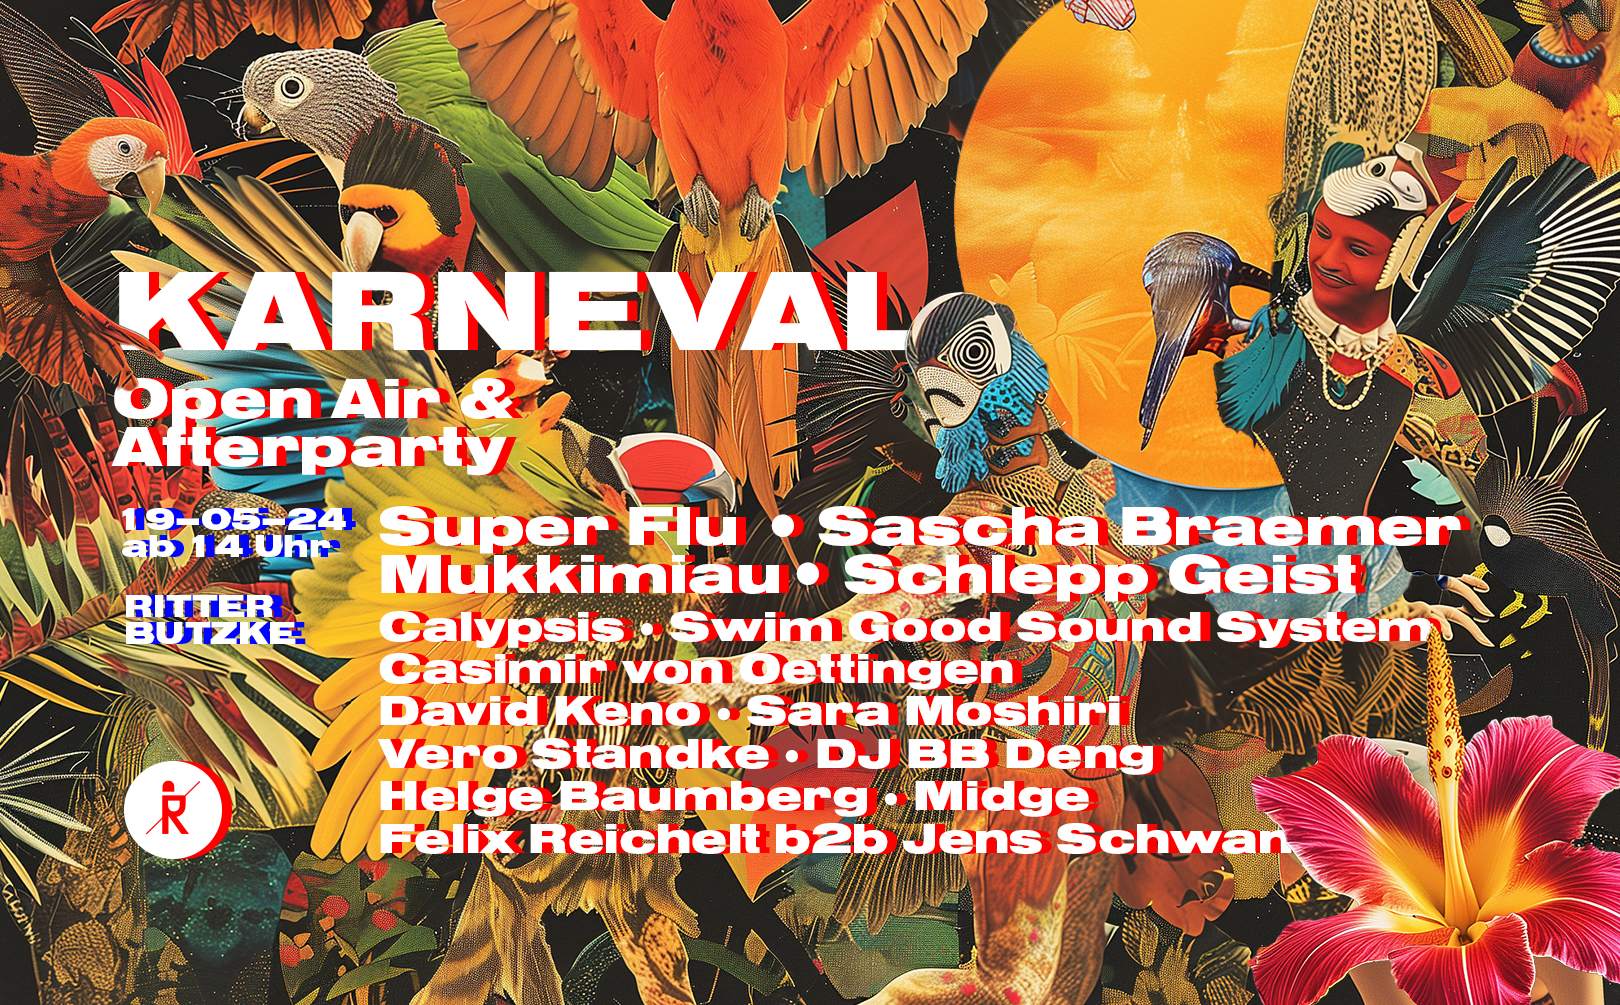 Karneval Open Air & Afterparty w/ Super Flu // free entry all night long - フライヤー表